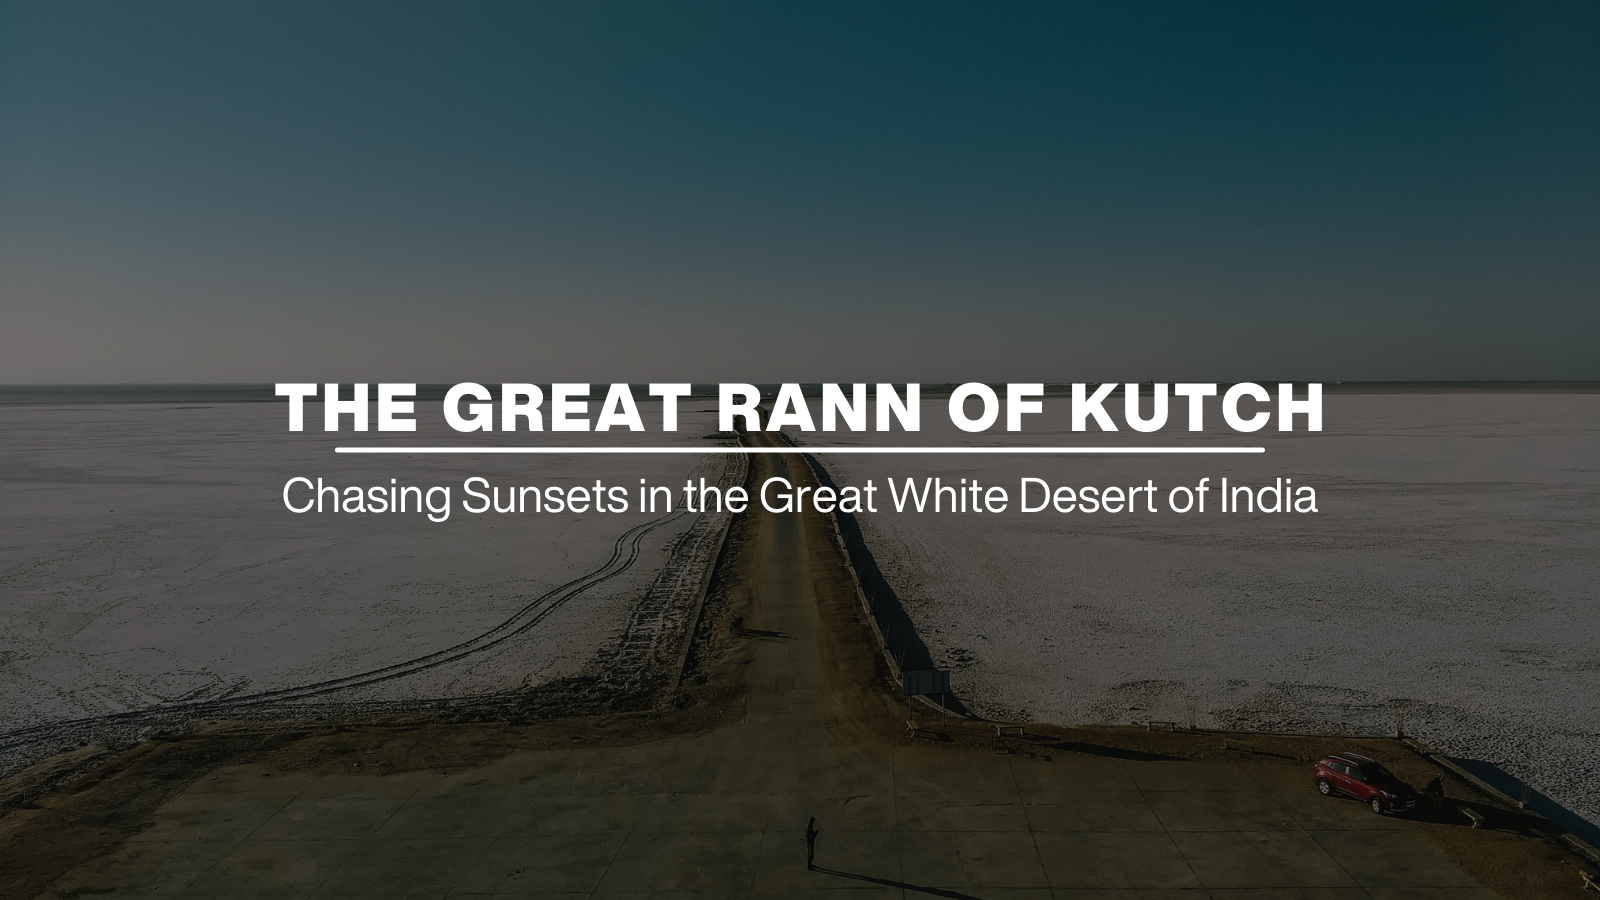 ADVENTURE MOTORCYCLING IN THE GREAT RANN OF KUTCH